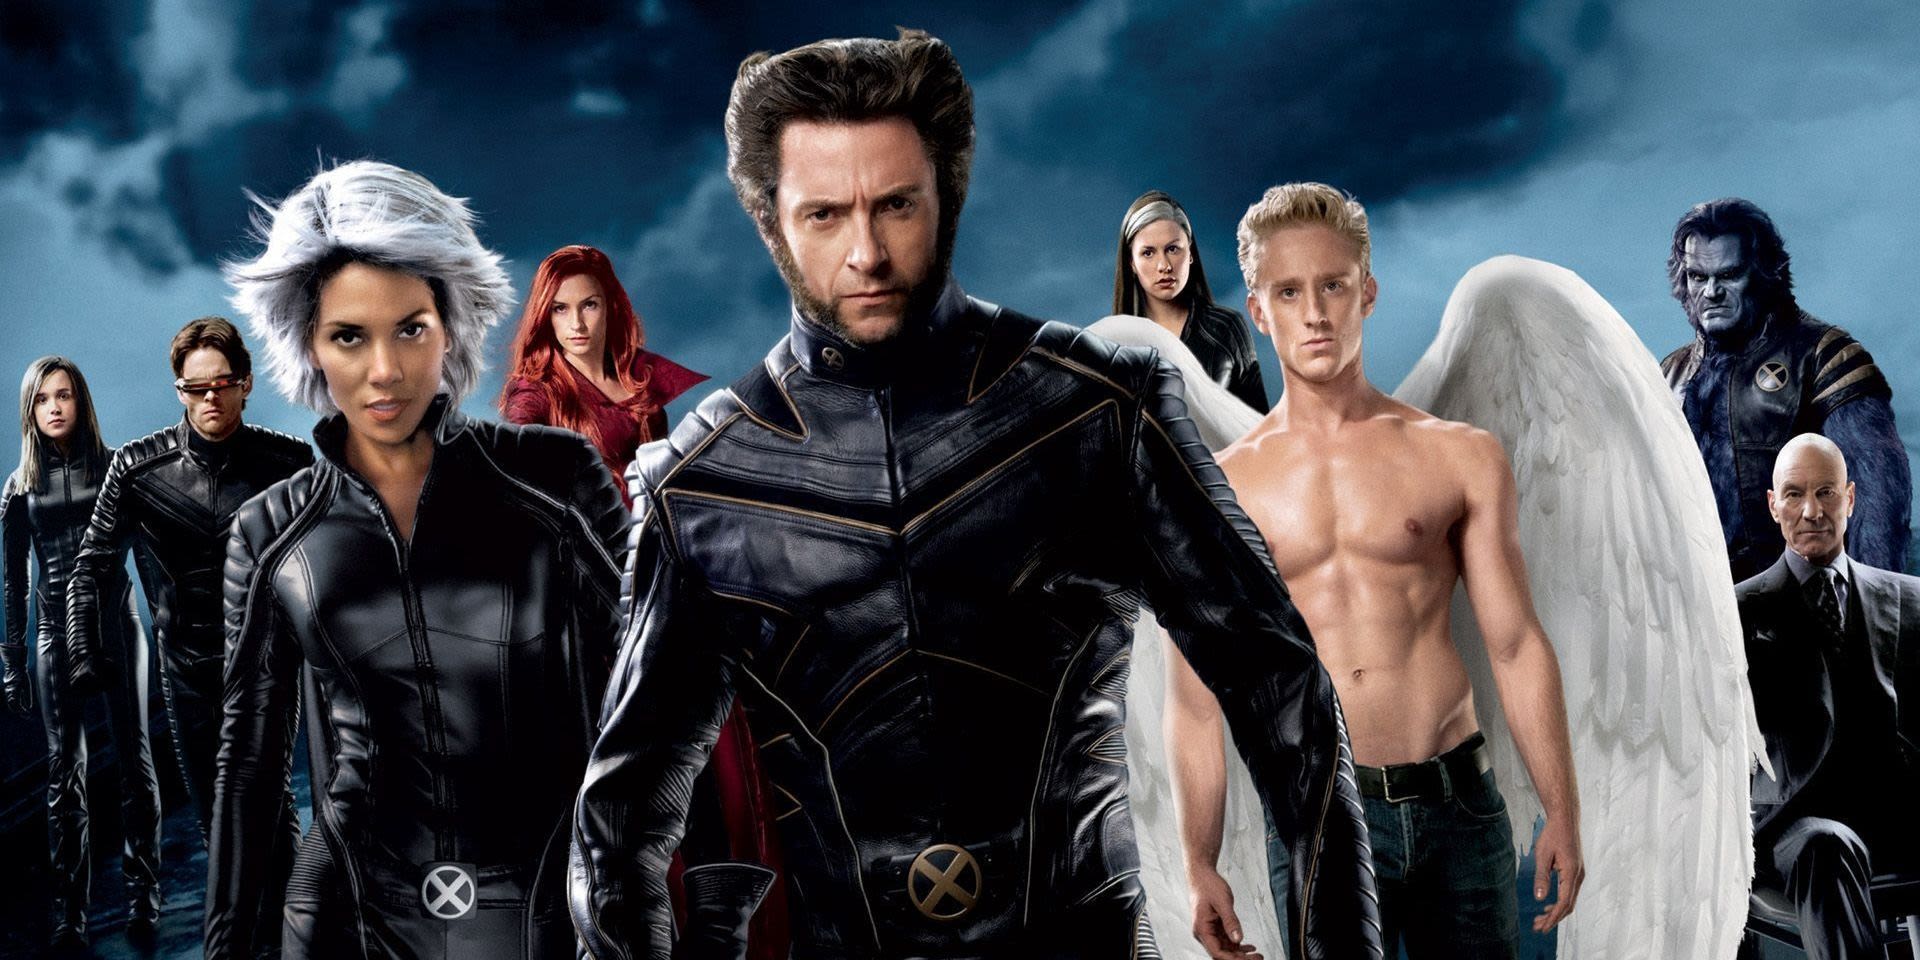 Kevin Feige Reveals the Real Reason the X-Men Wore Black Leather Suits in Original Film